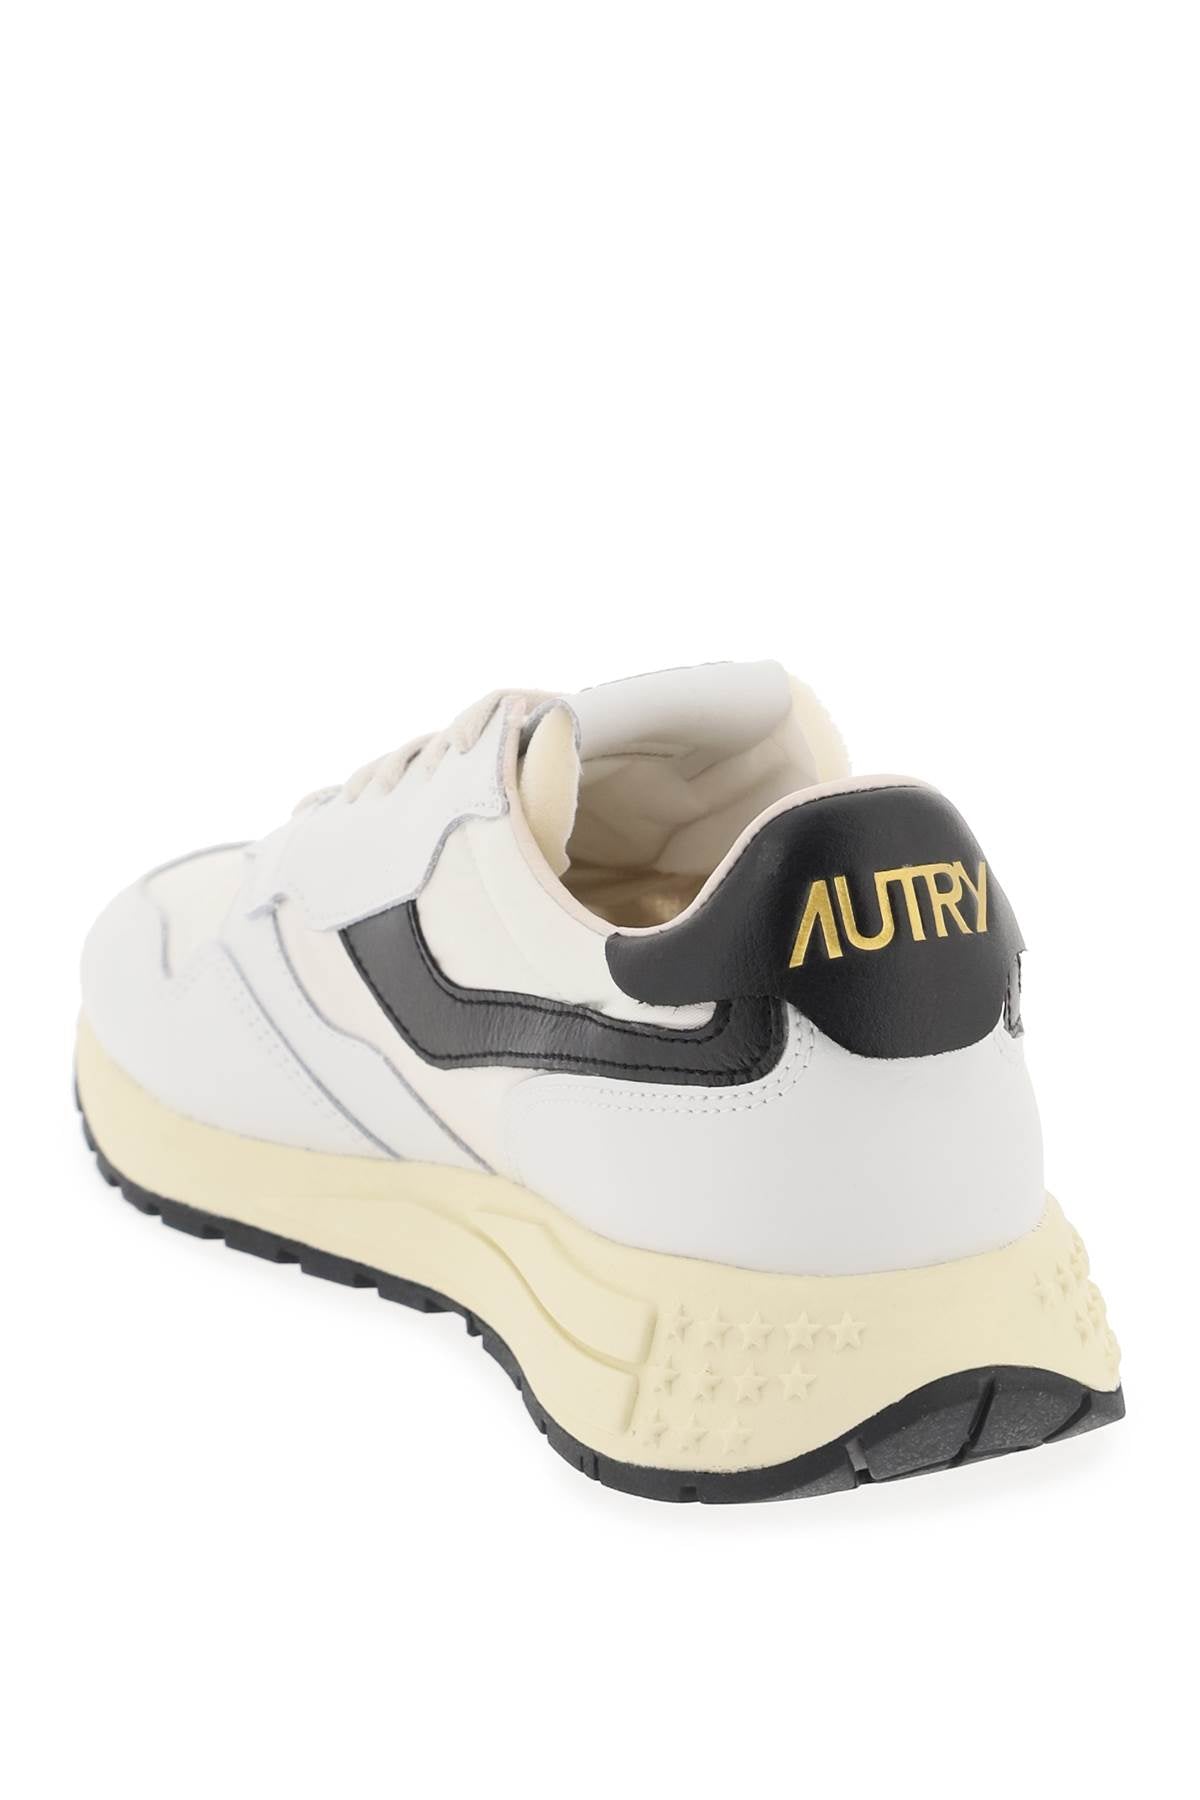 Autry low-cut nylon and leather reelwind sneakers-2